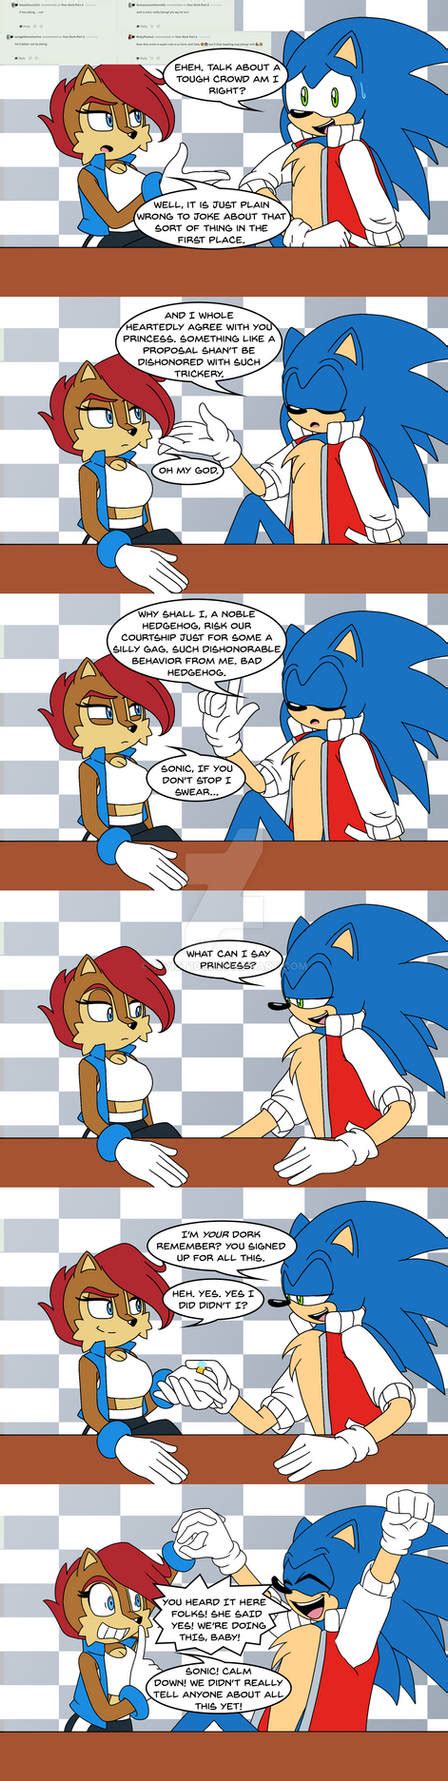 Au Ask Sonic And Sally Joke By T Vict101 On Deviantart